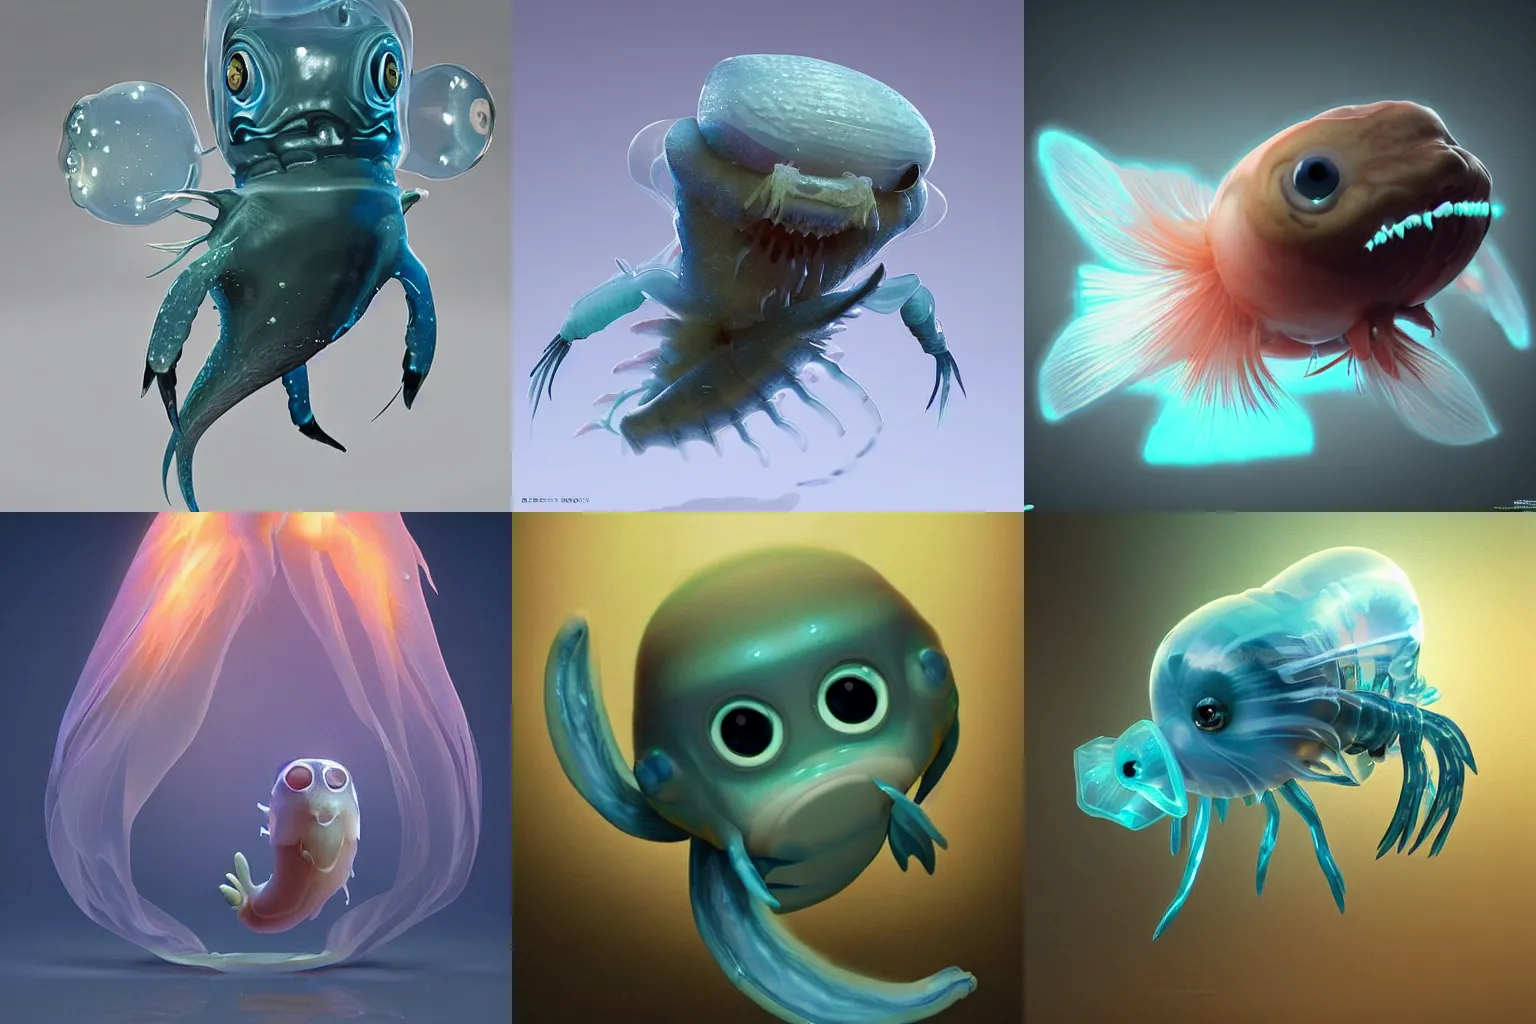 Prompt: cute! ghost shrimp, Barreleye fish, translucent SSS xray, Barreleye, rimlight, jelly fish dancing, fighting, bioluminescent screaming pictoplasma characterdesign toydesign toy monster creature, zbrush, octane, hardsurface modelling, artstation, cg society, by greg rutkowksi, by Eddie Mendoza, by Peter mohrbacher, by tooth wu